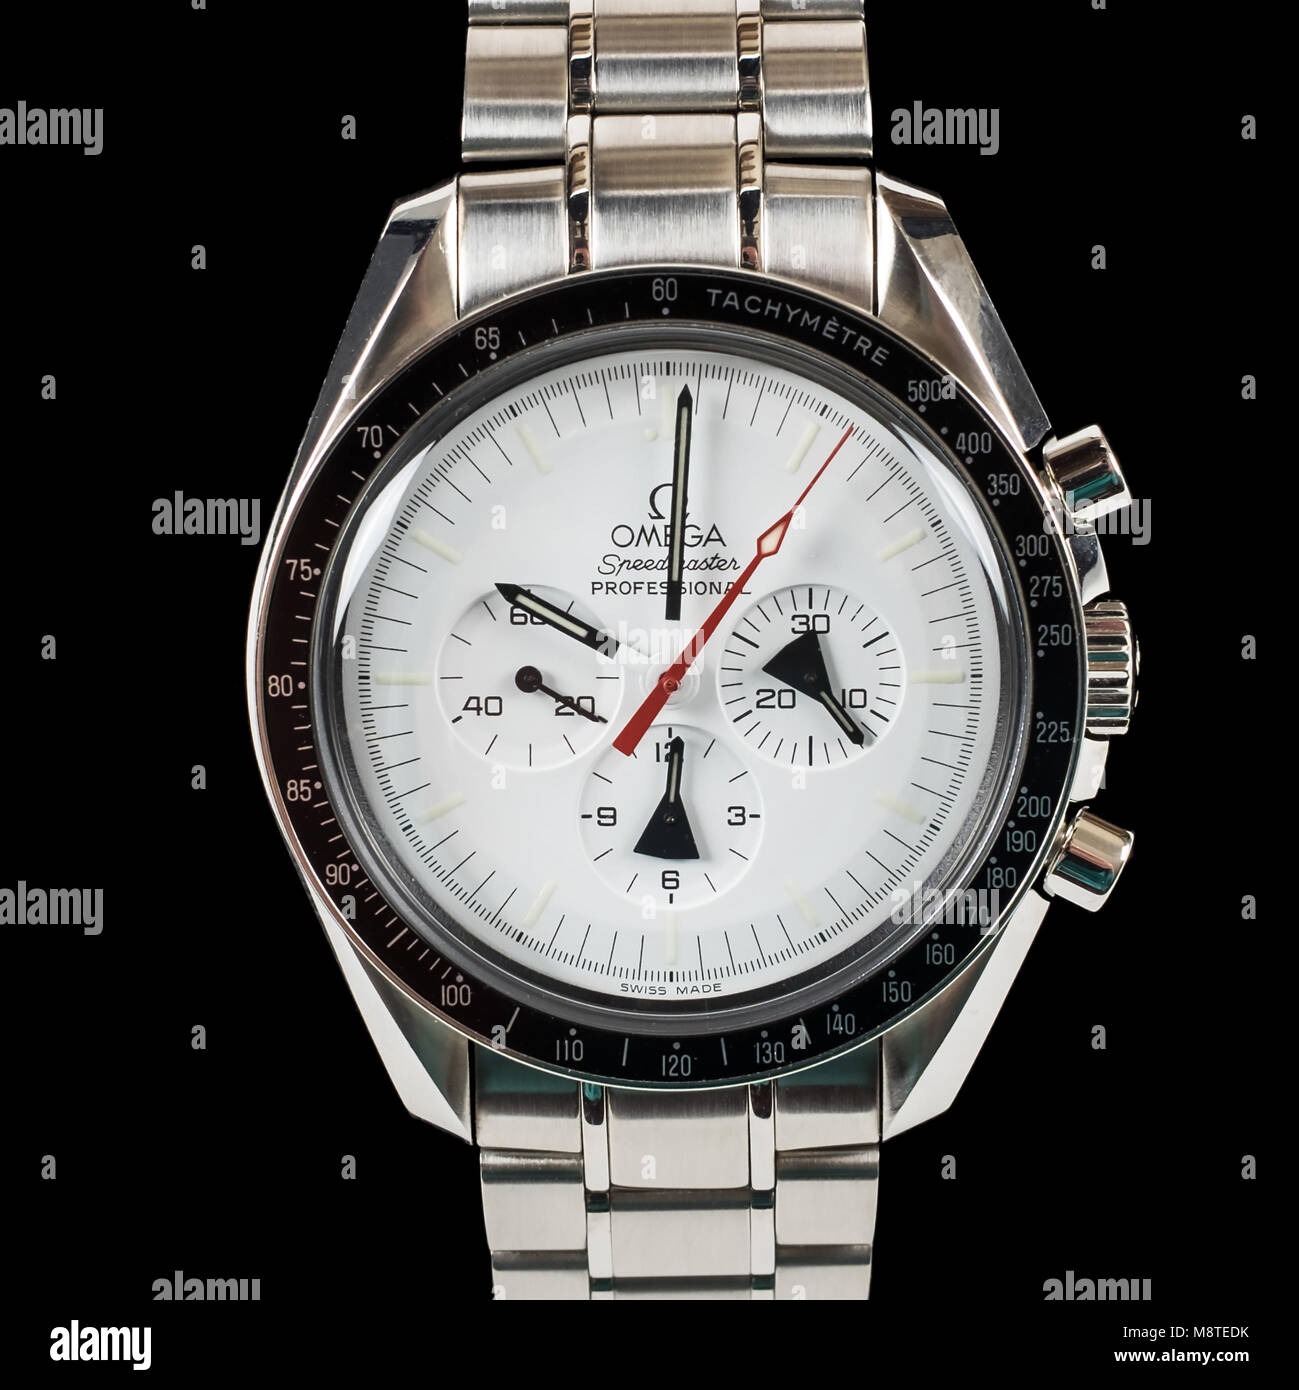 Omega Speedmaster Professional 'Alaska Project' Moonwatch, issued in 2008 in a Limited Edition of 1970 pieces only. Stock Photo